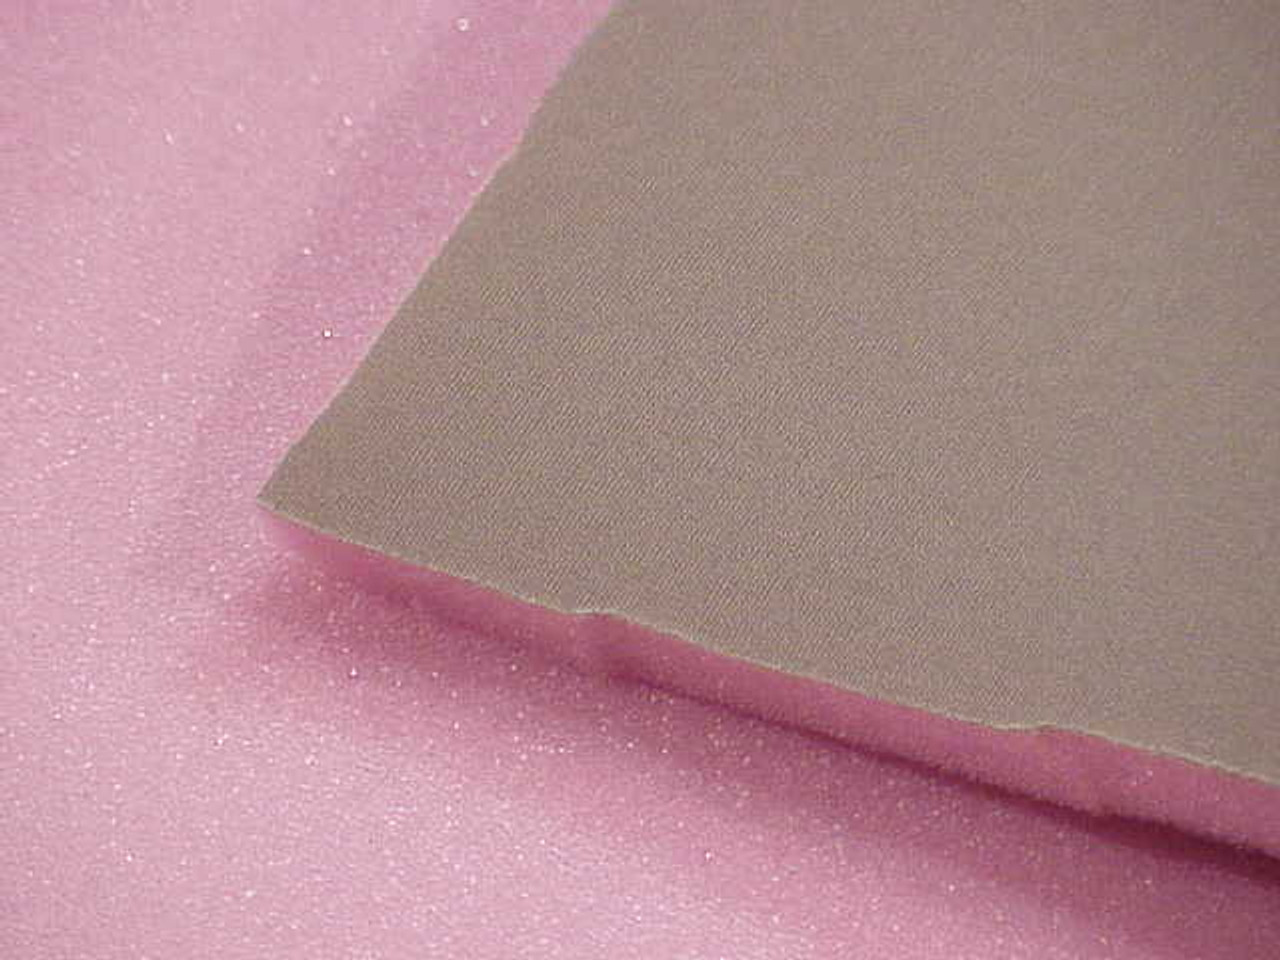 1/2" Thick "TS Backed" Pleating - Sew Foam Pink